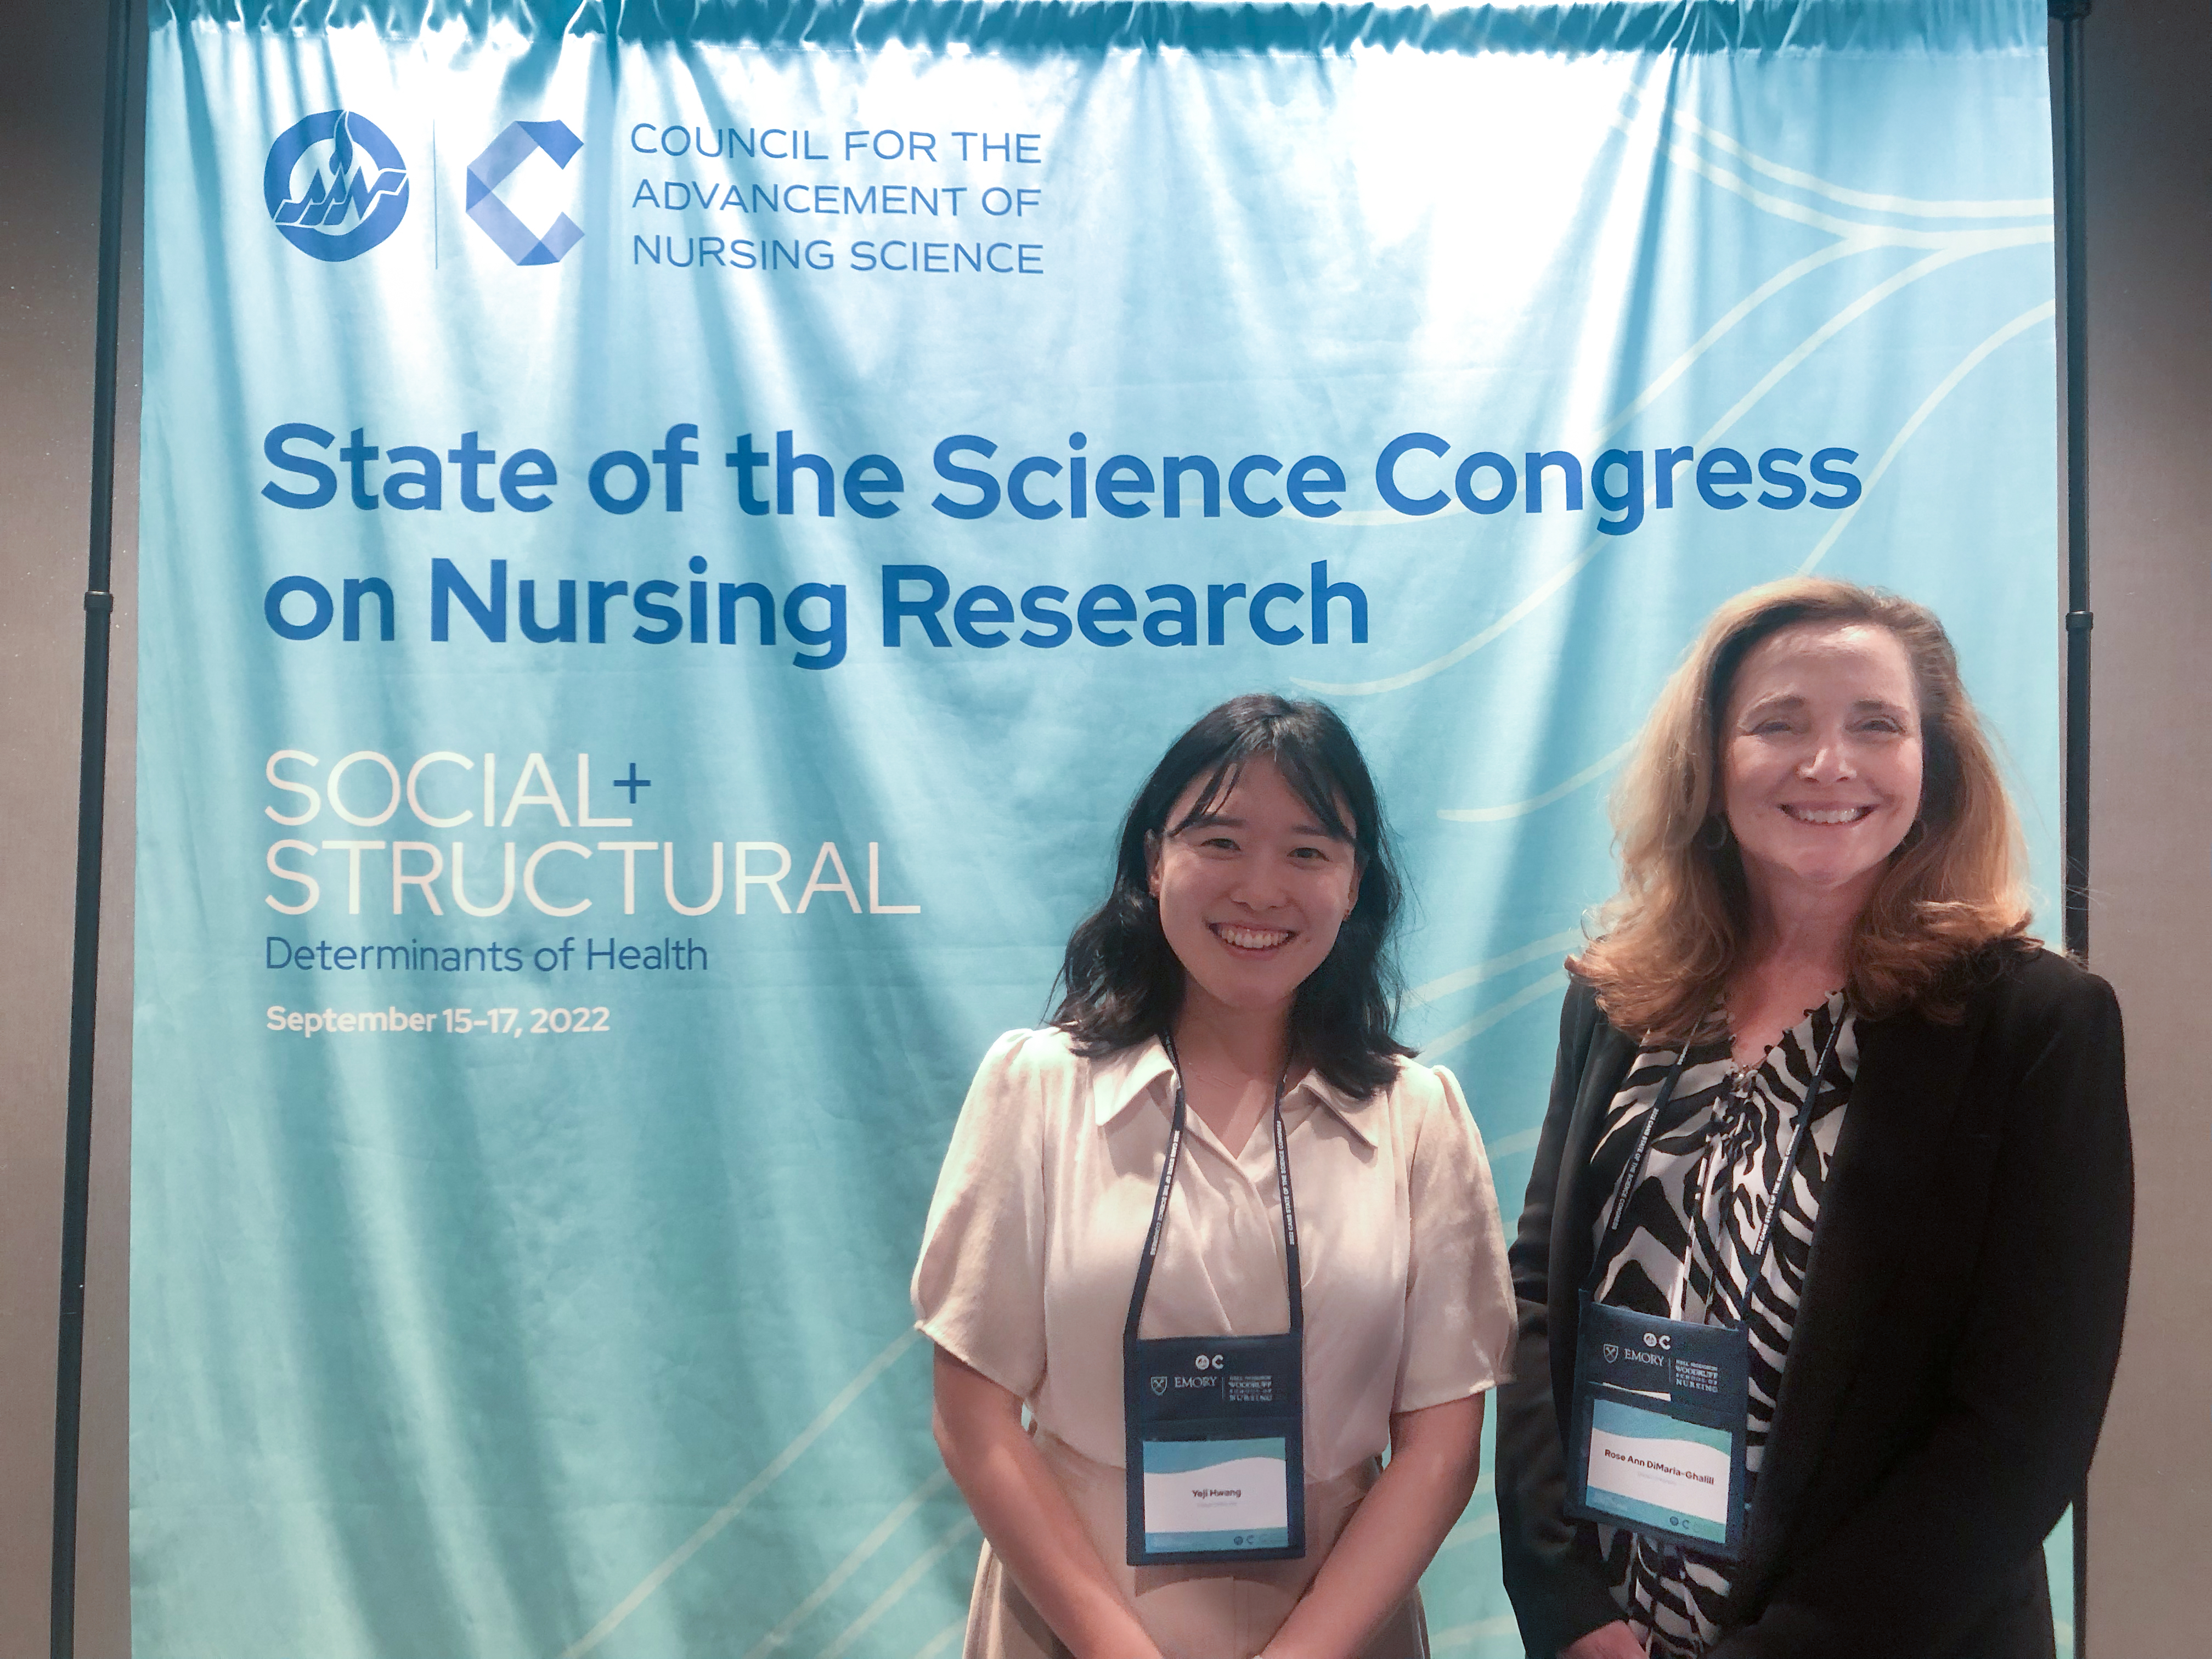 College of Nursing and Health Professions' Yeji Hwang, PhD, RN, a postdoctoral fellow, standing with Rose Ann DiMaria-Ghalili, PhD, a professor of nursing and senior associate dean for Research Doctoral Nursing